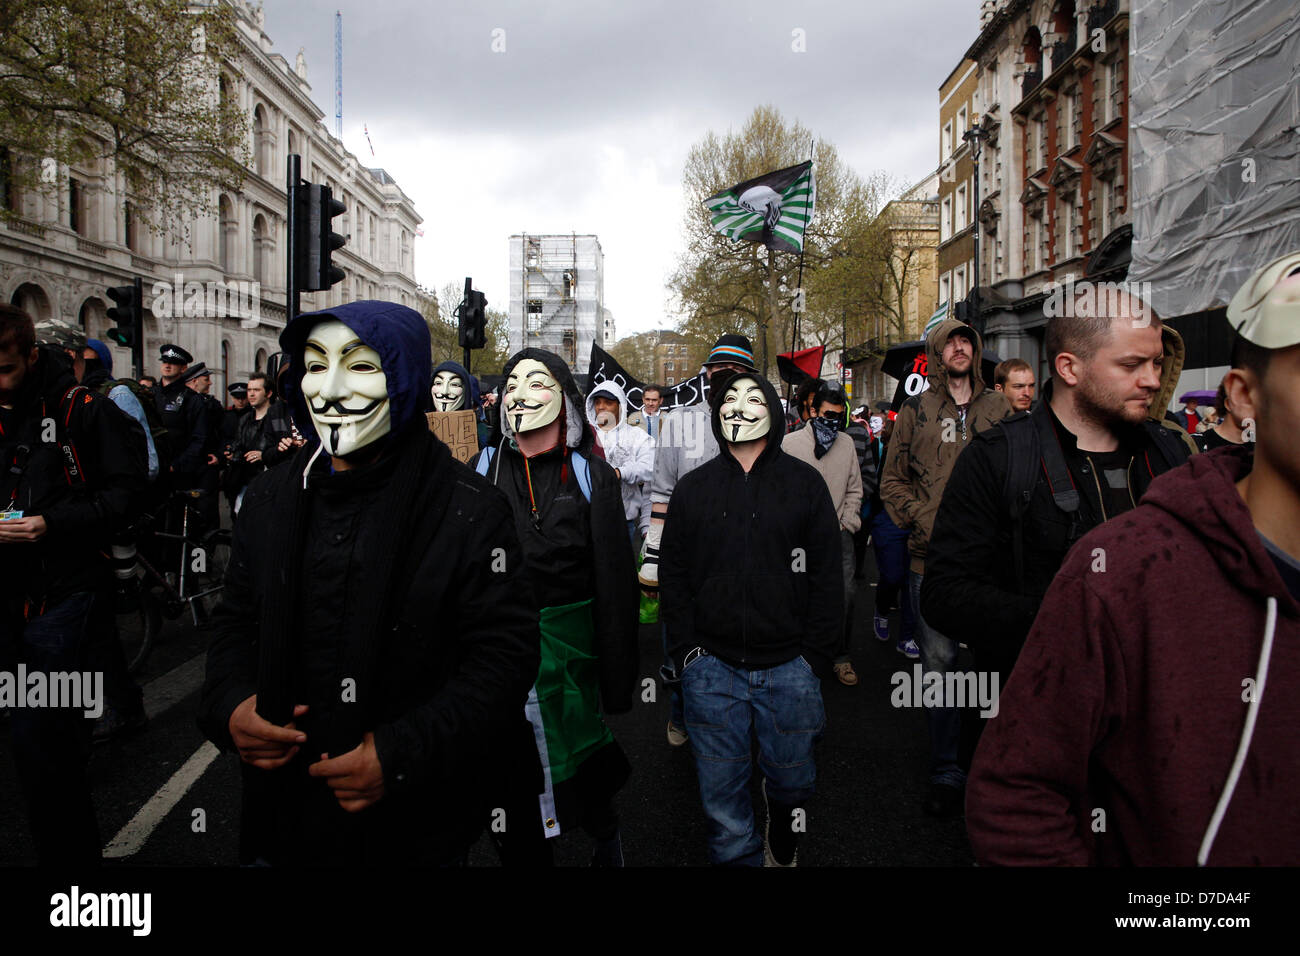 LONDON 4th March 2013. The anonymous protesters gathered at Trafalgar Square to protest against austerity and government cuts. Protesters marched towards Whitehall under police supervision. Stock Photo